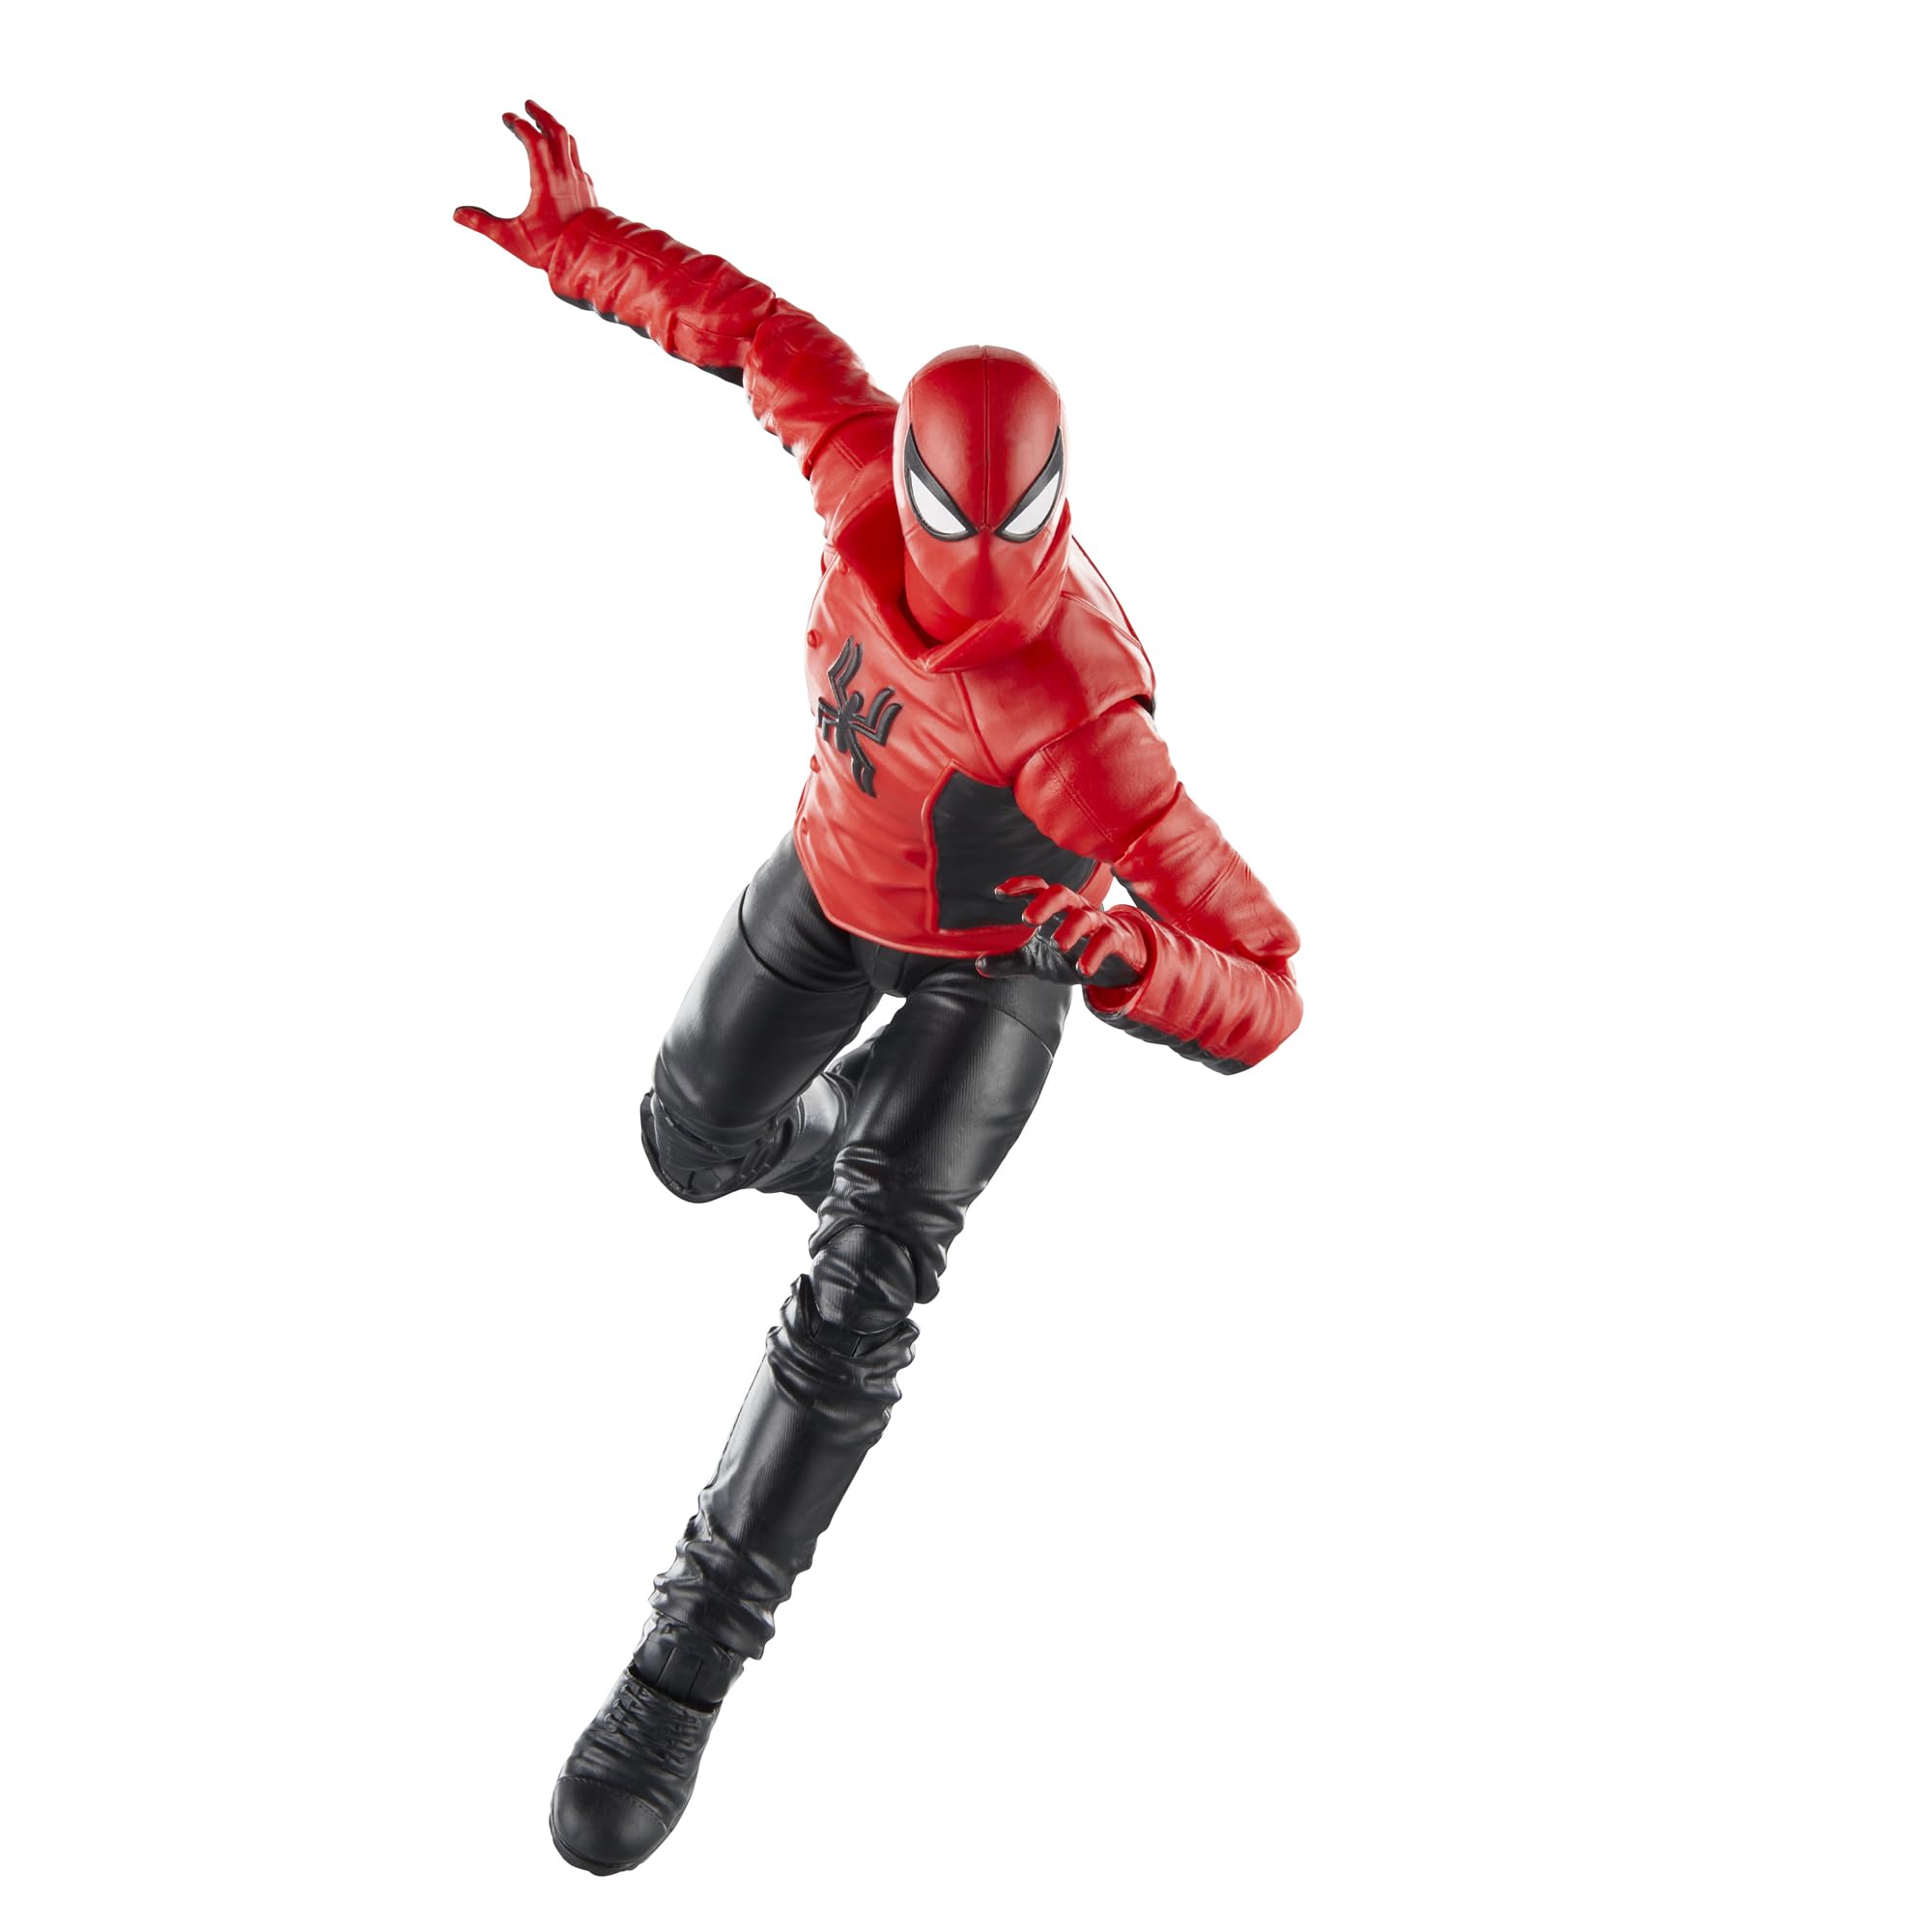 Marvel Legends Series Last Stand Spider-Man, Comics Collectible 6-Inch Action Figure